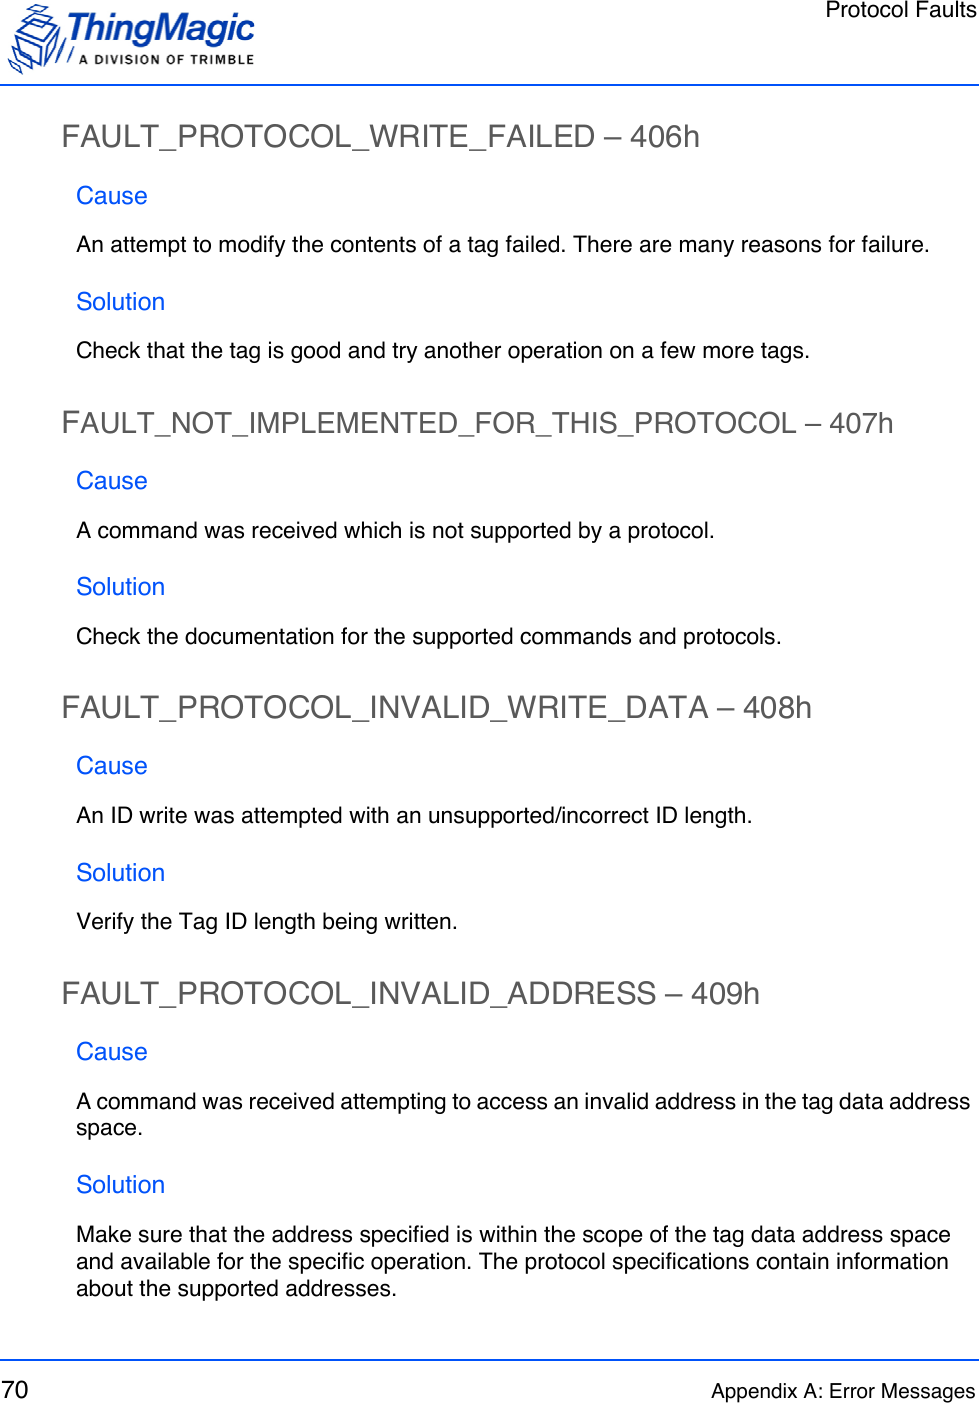 Protocol Faults70 Appendix A: Error MessagesFAULT_PROTOCOL_WRITE_FAILED – 406hCauseAn attempt to modify the contents of a tag failed. There are many reasons for failure.SolutionCheck that the tag is good and try another operation on a few more tags.FAULT_NOT_IMPLEMENTED_FOR_THIS_PROTOCOL – 407hCauseA command was received which is not supported by a protocol.SolutionCheck the documentation for the supported commands and protocols.FAULT_PROTOCOL_INVALID_WRITE_DATA – 408hCauseAn ID write was attempted with an unsupported/incorrect ID length.SolutionVerify the Tag ID length being written.FAULT_PROTOCOL_INVALID_ADDRESS – 409hCauseA command was received attempting to access an invalid address in the tag data address space. SolutionMake sure that the address specified is within the scope of the tag data address space and available for the specific operation. The protocol specifications contain information about the supported addresses.